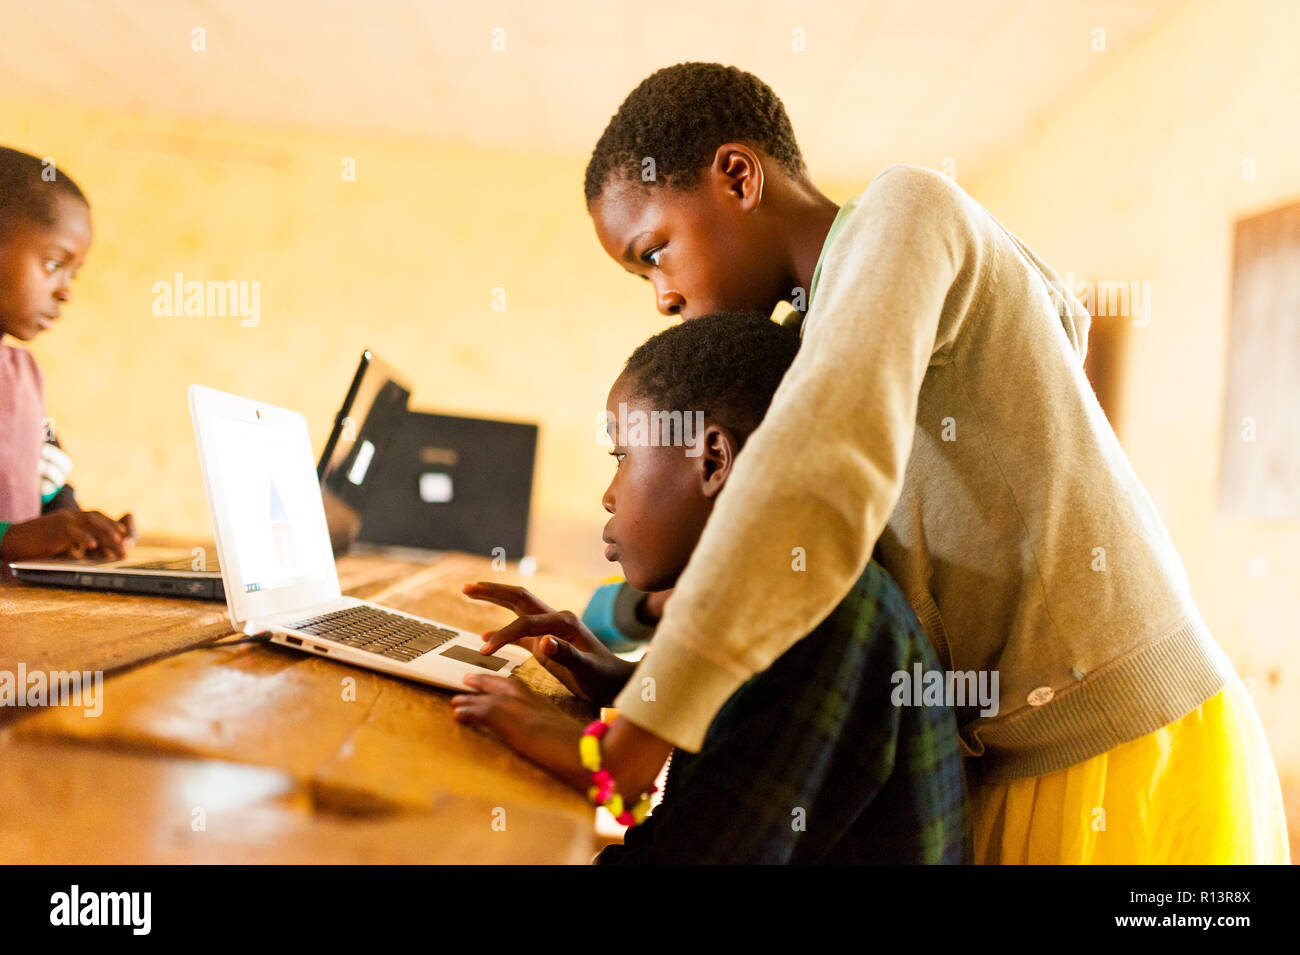 Bafoussam, Cameroon - 06 august 2018: beautiful image of african school children learning to use computer in classroom of african school Stock Photo